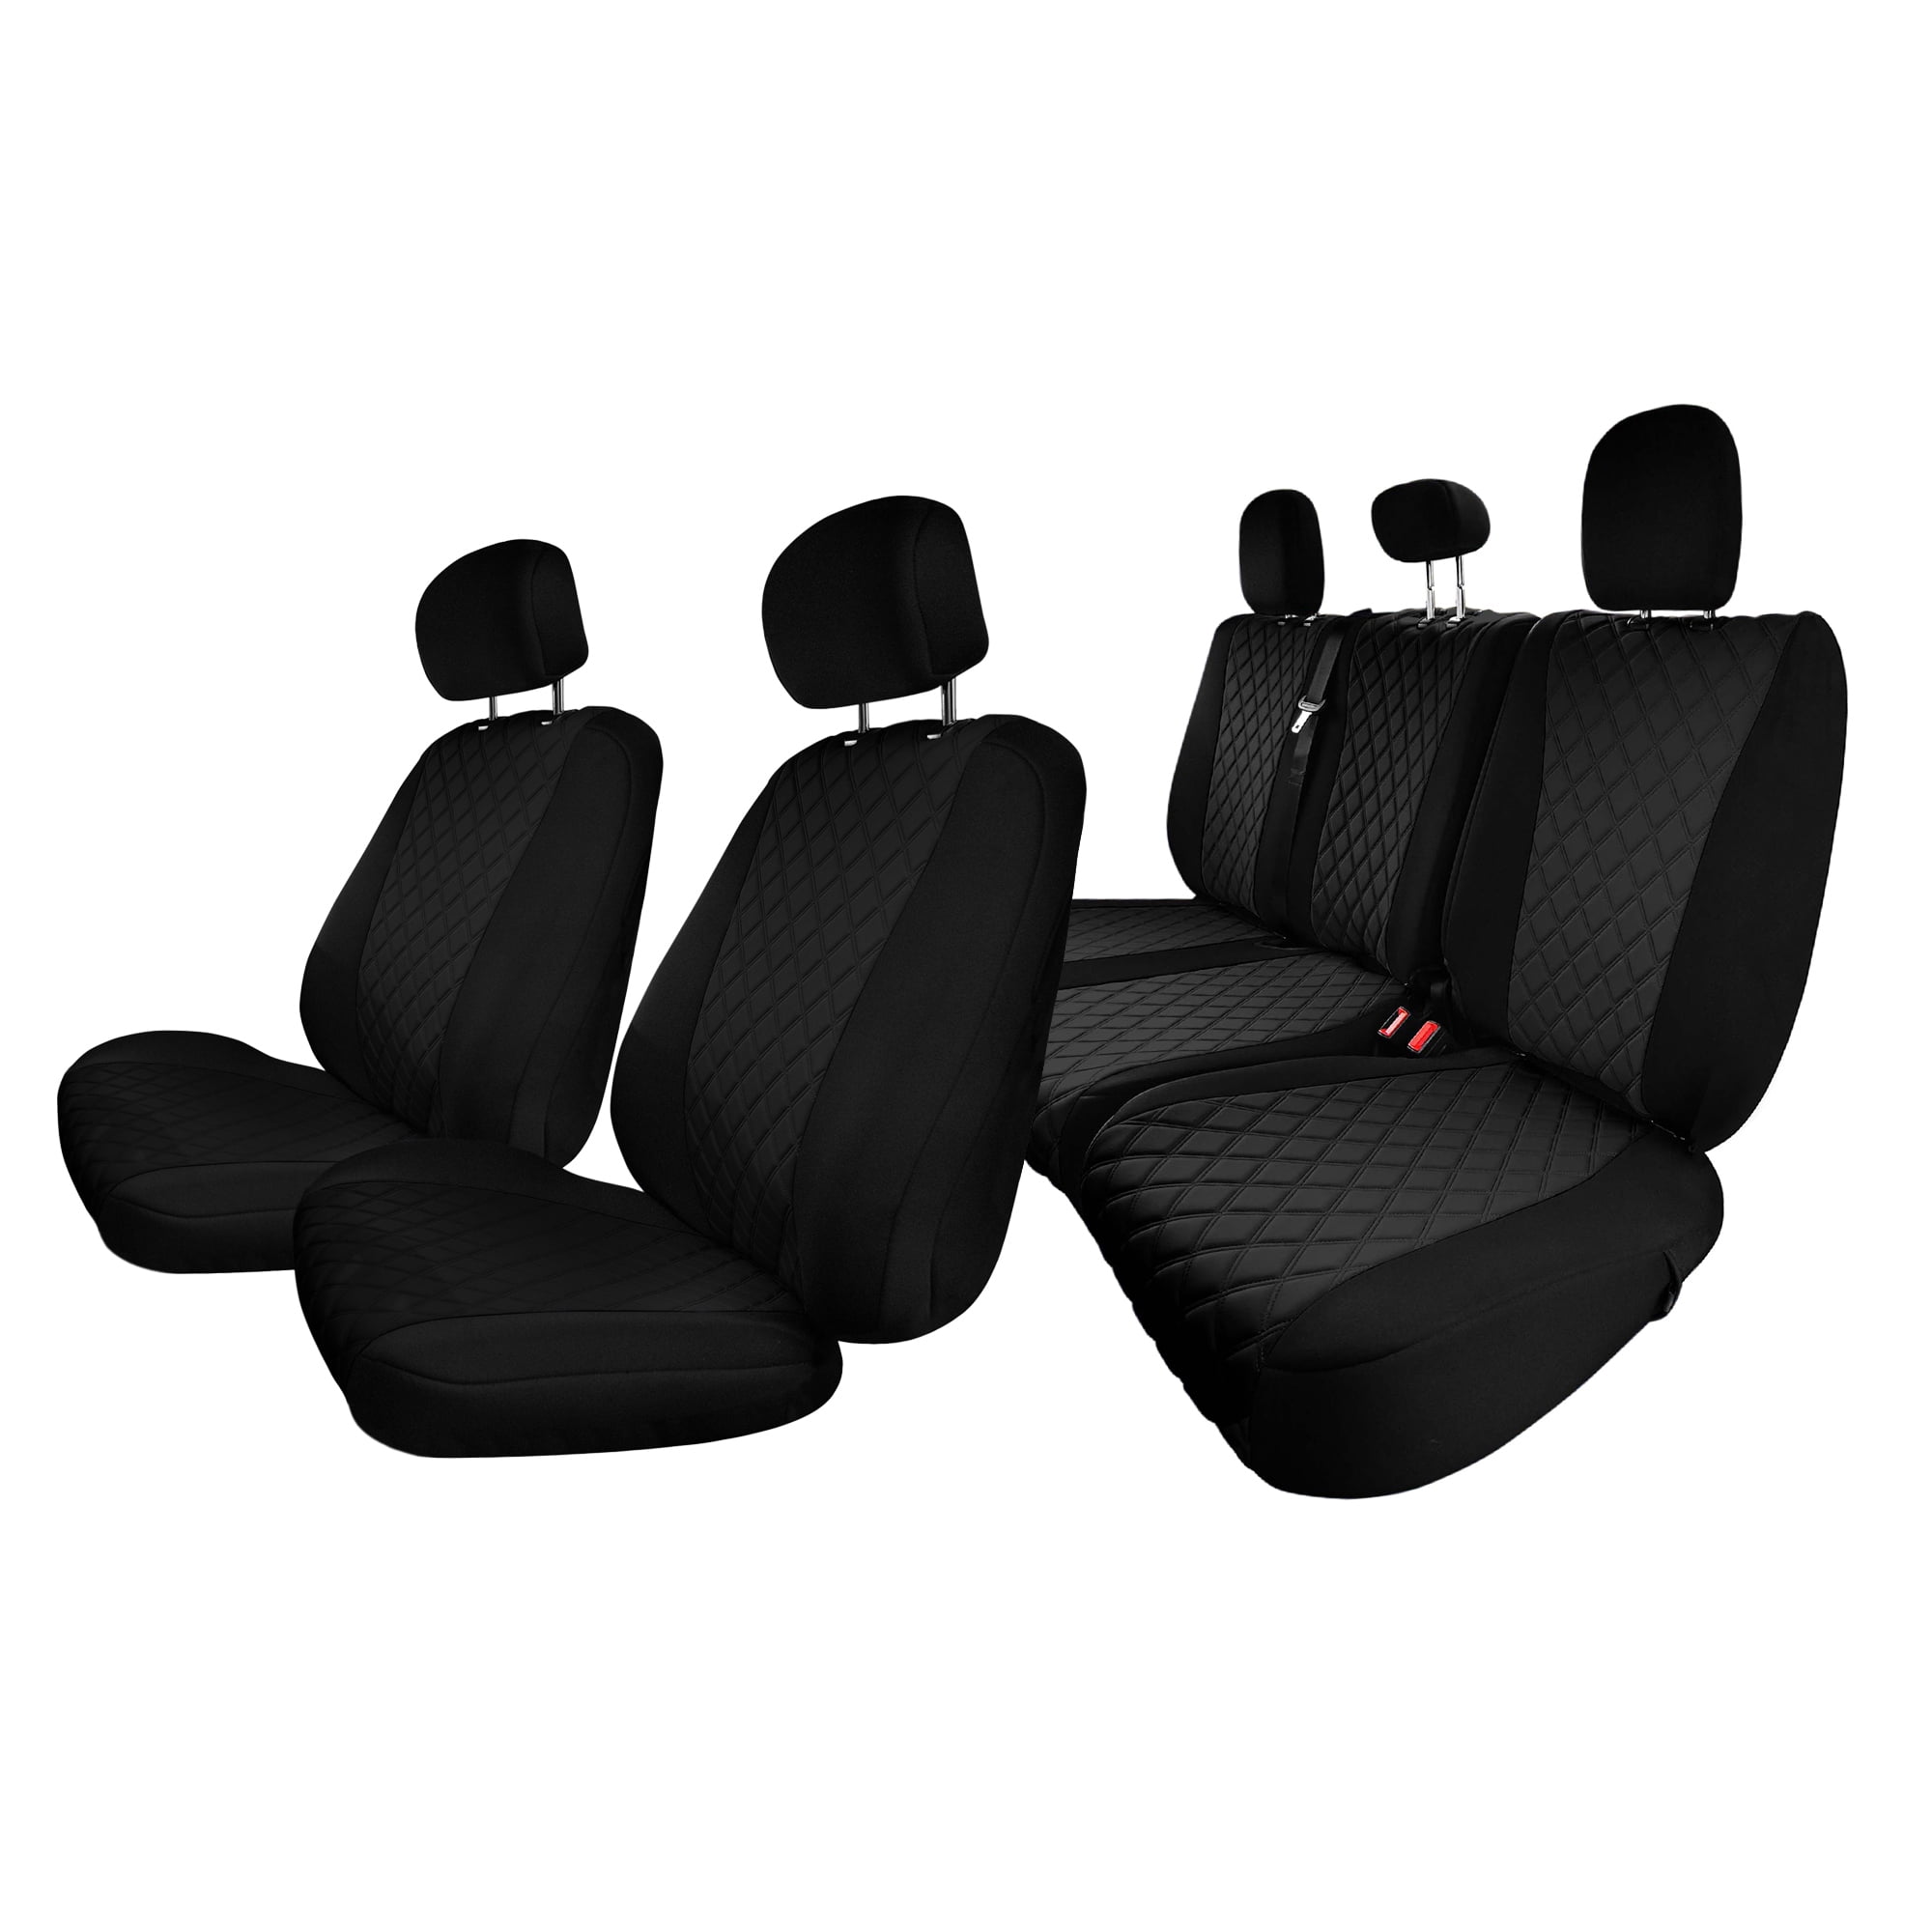 FH Group Neoprene Custom Fit Seat Covers for 2015-2022 Ford F-150 & 2017-2022 Ford F-250 F-350 F450 Full Set -